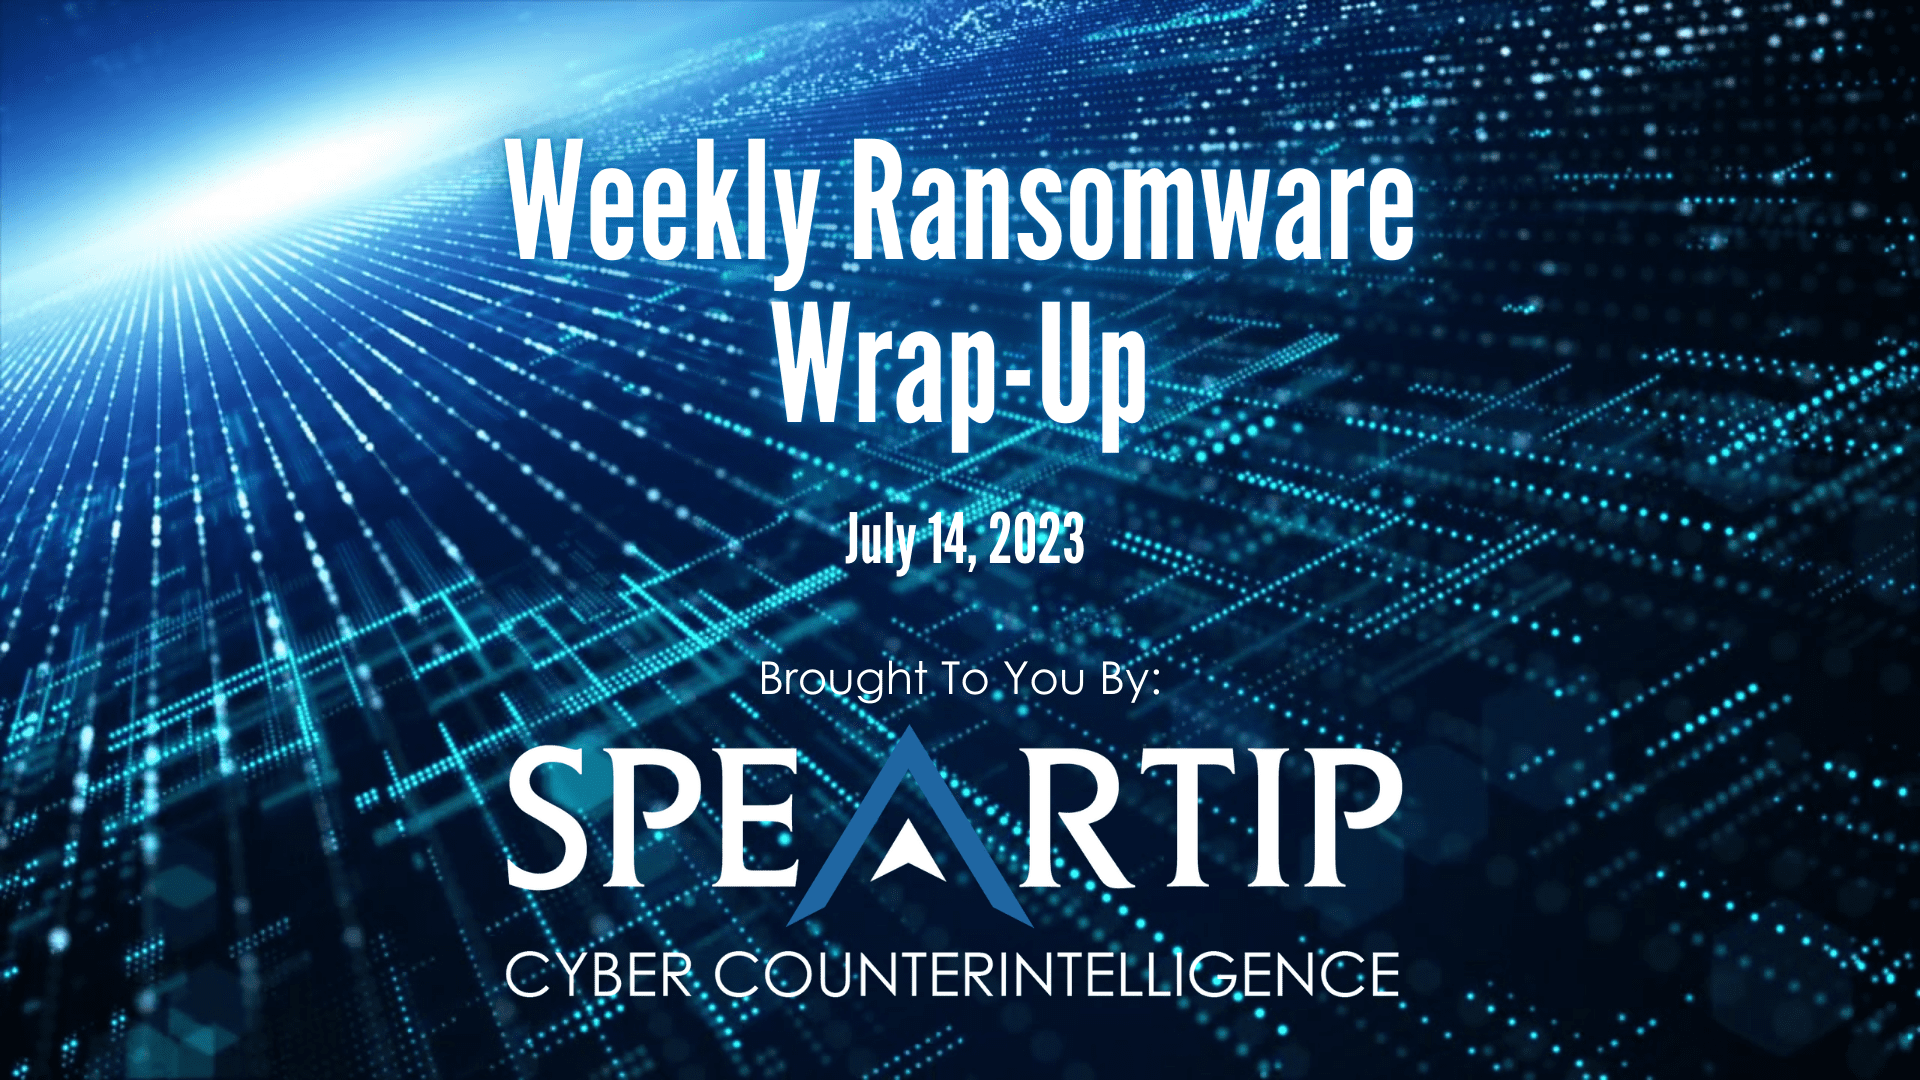 July-14-2023-Weekly Ransomware Wrap-up